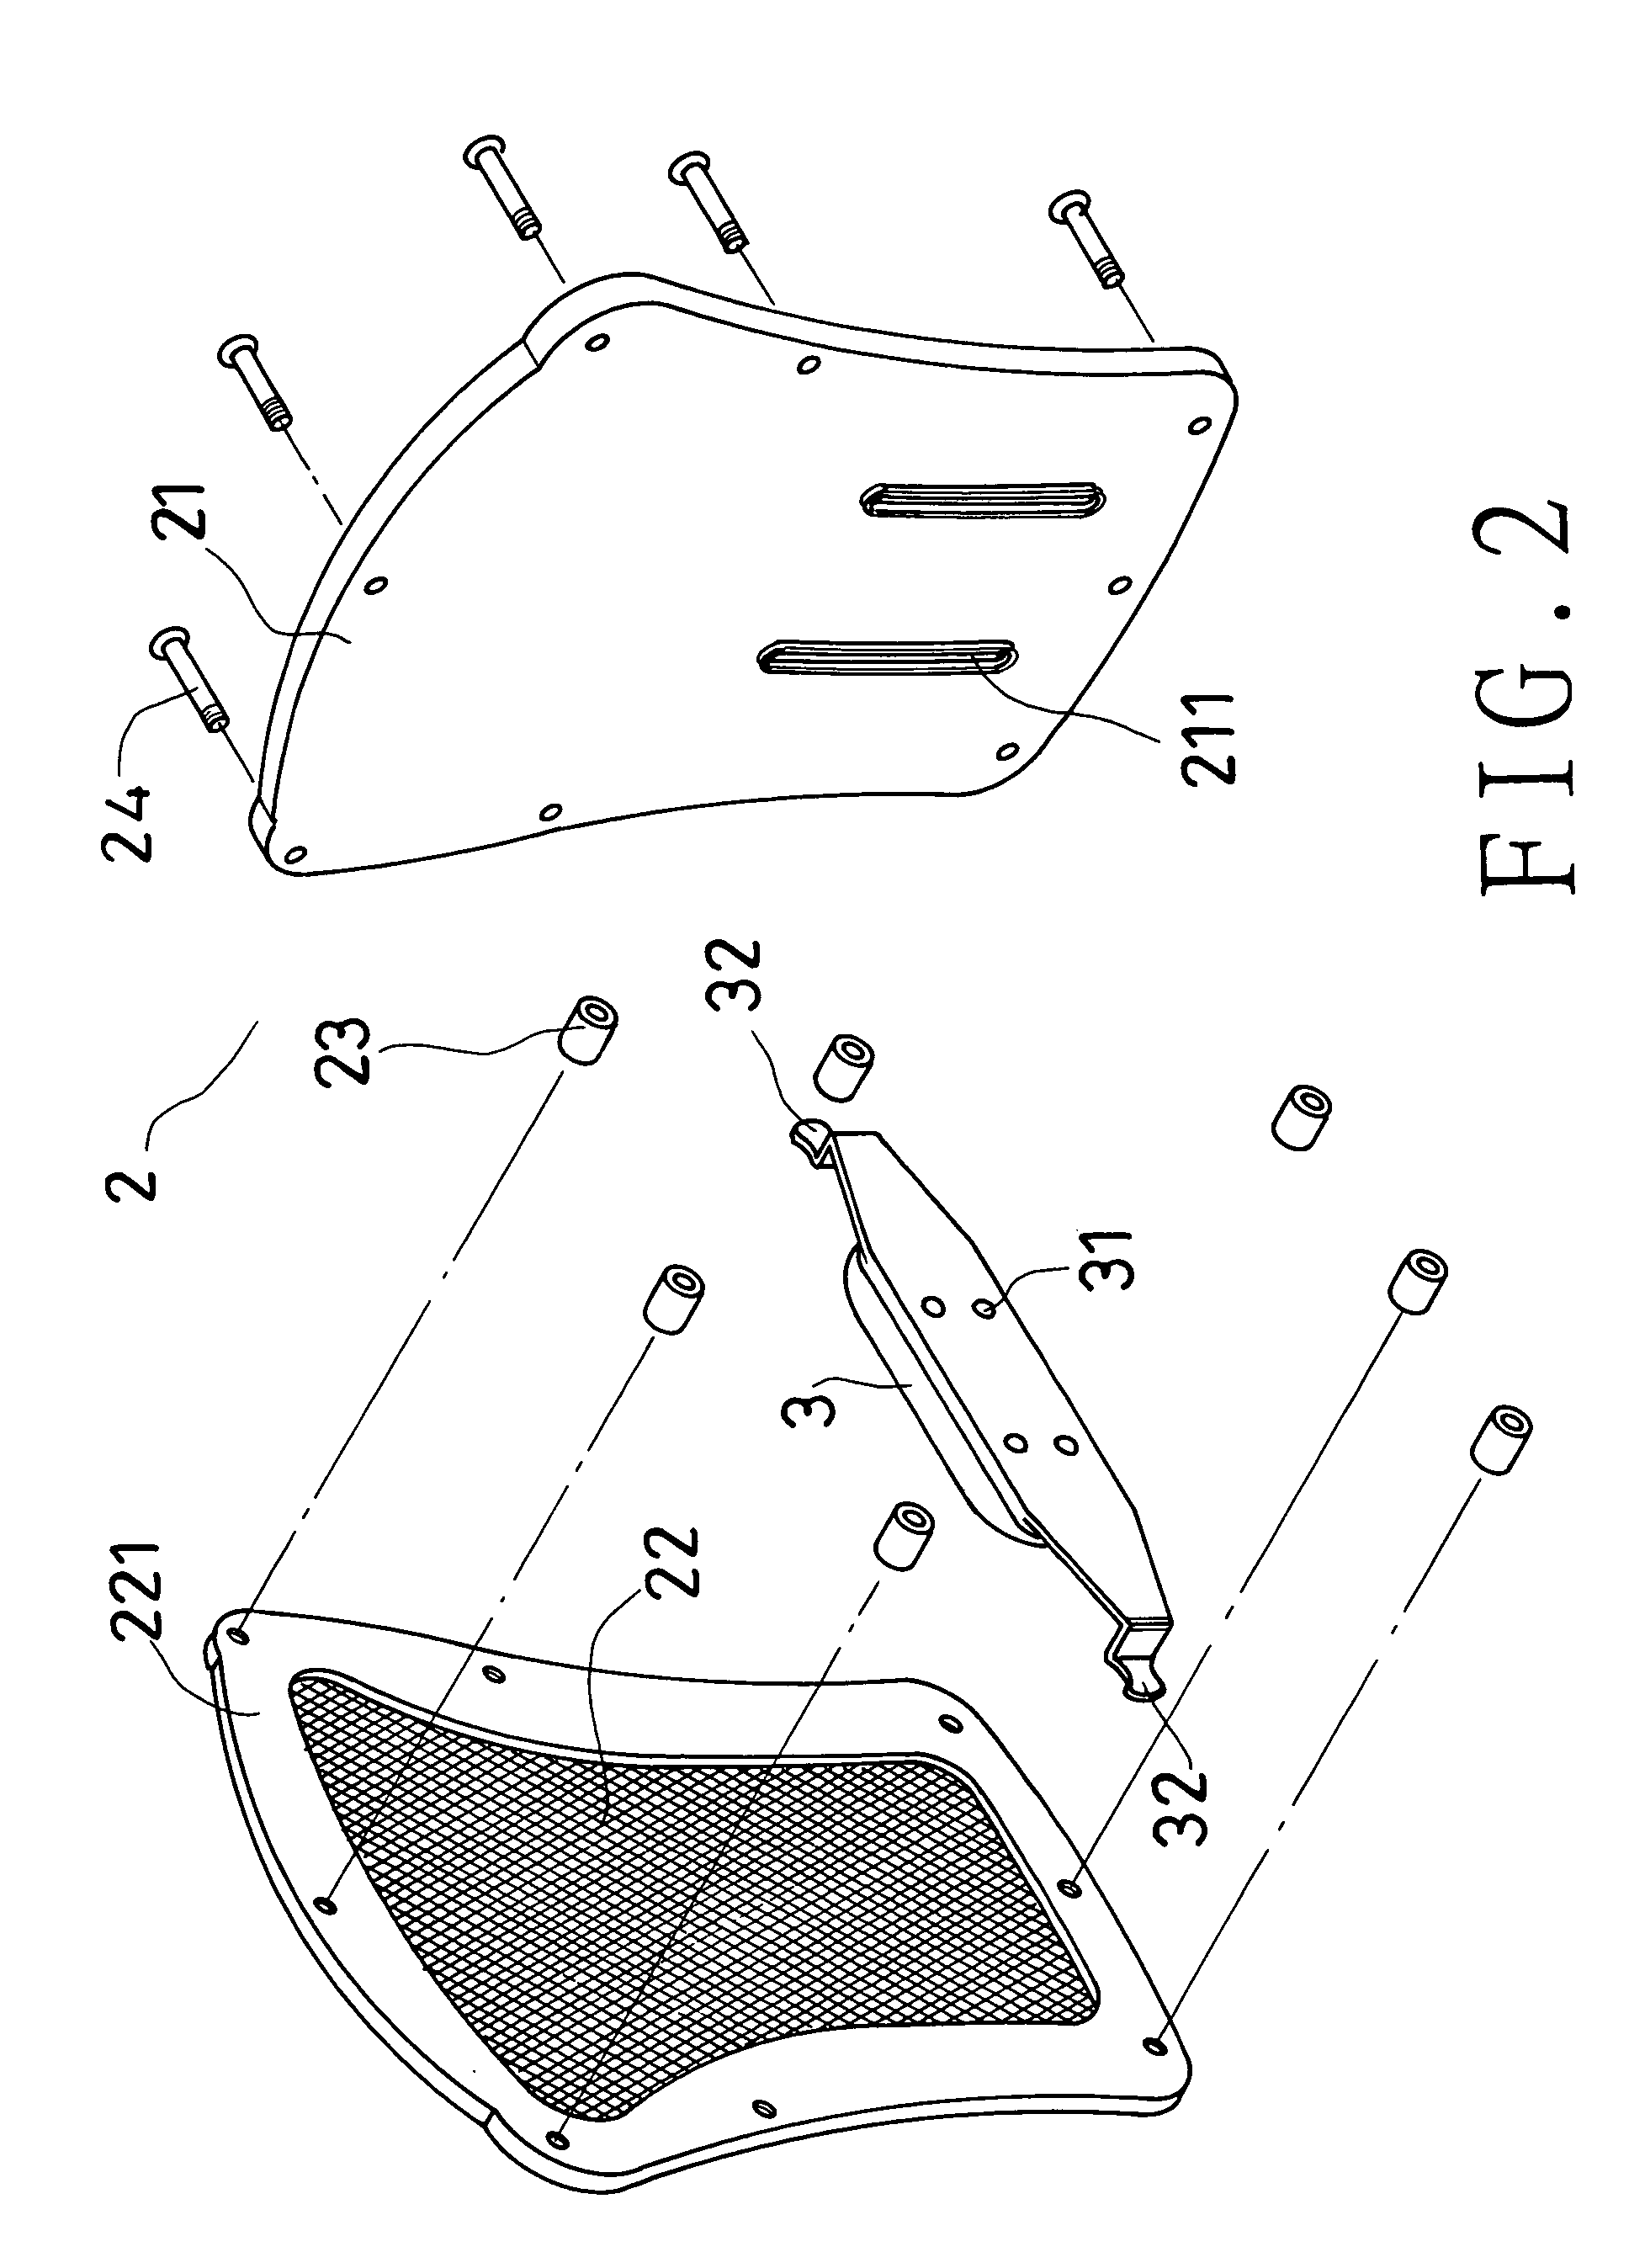 Waist supporting structure of a dual-layer chair back